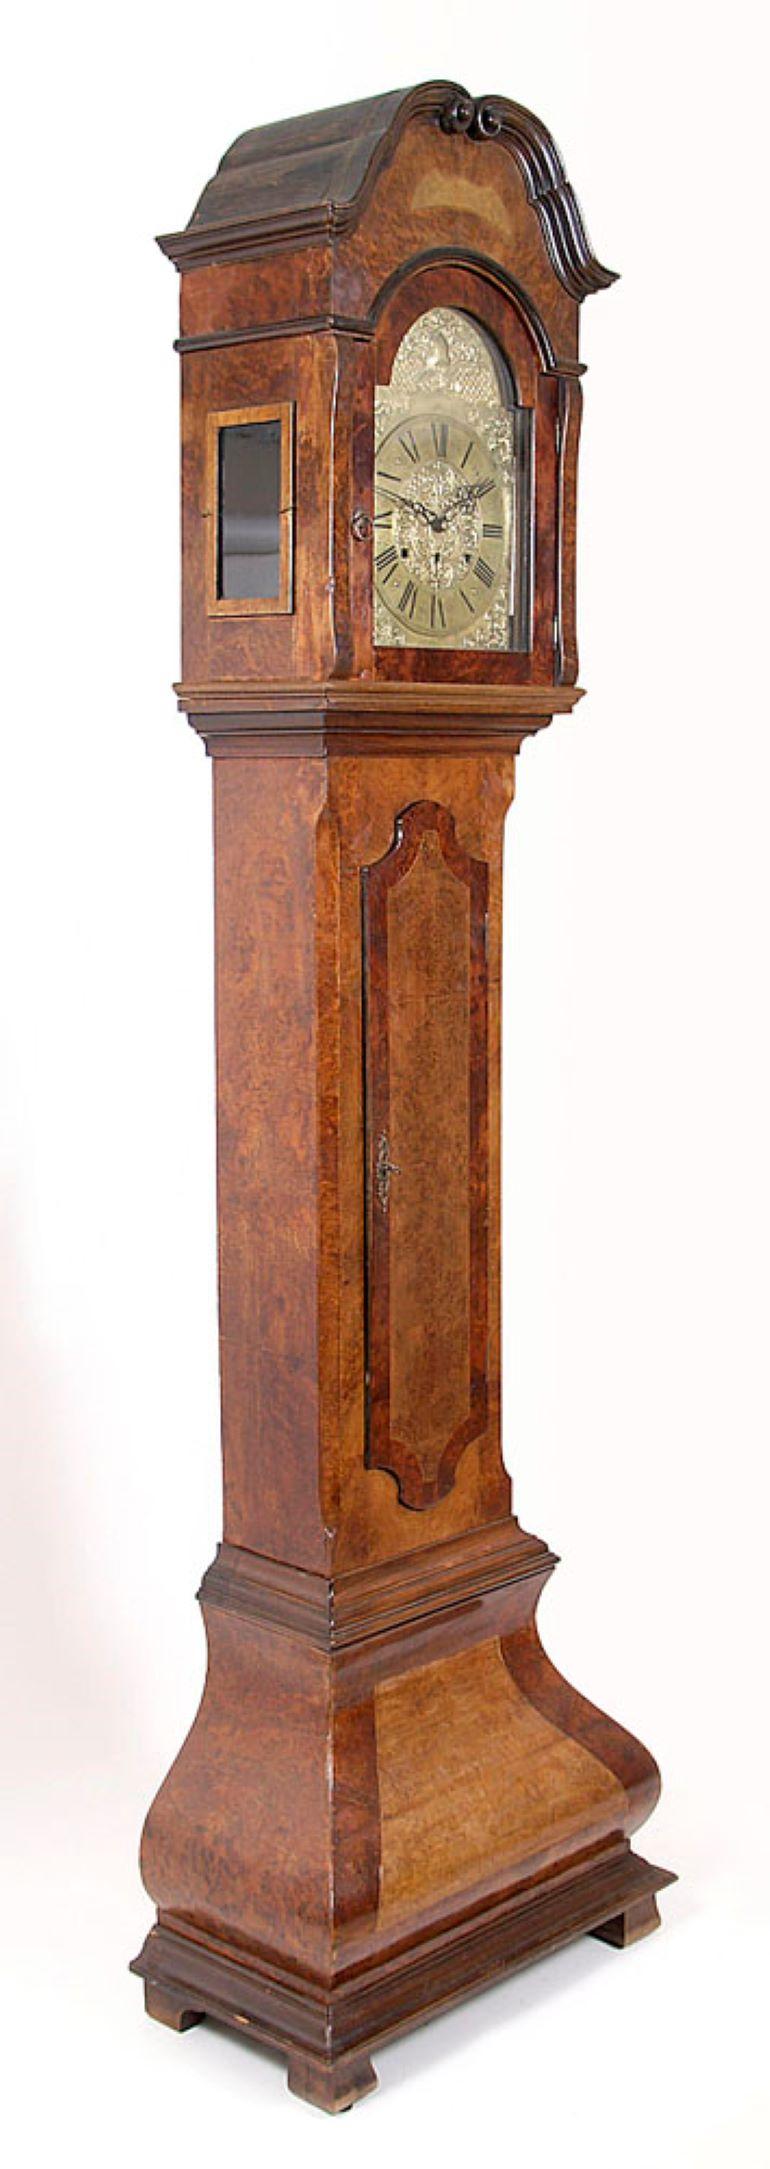 Grandfather clock, floor-type long case, one-piece, in a rectangular cabinet, with a separate, wider base, curved at the bottom, supported on four legs, front block shaped, rear console legs.
Stem with full, lockable doors. A hood with a glass door